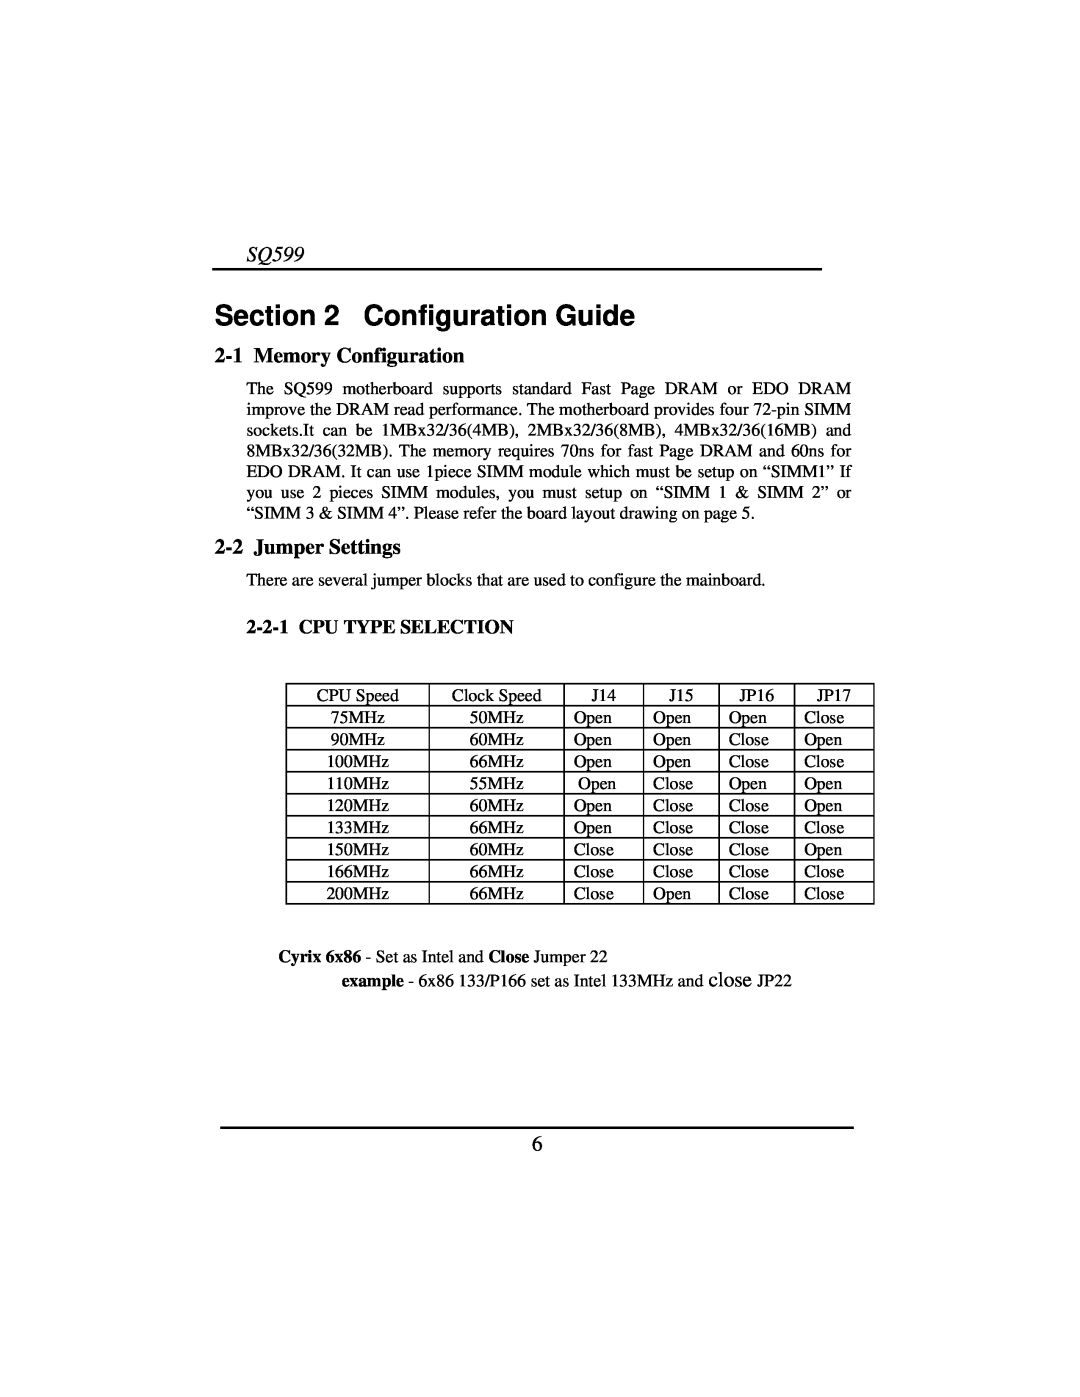 Intel SQ599 manual Configuration Guide, 2-1Memory Configuration, 2-2Jumper Settings, 2-2-1CPU TYPE SELECTION 